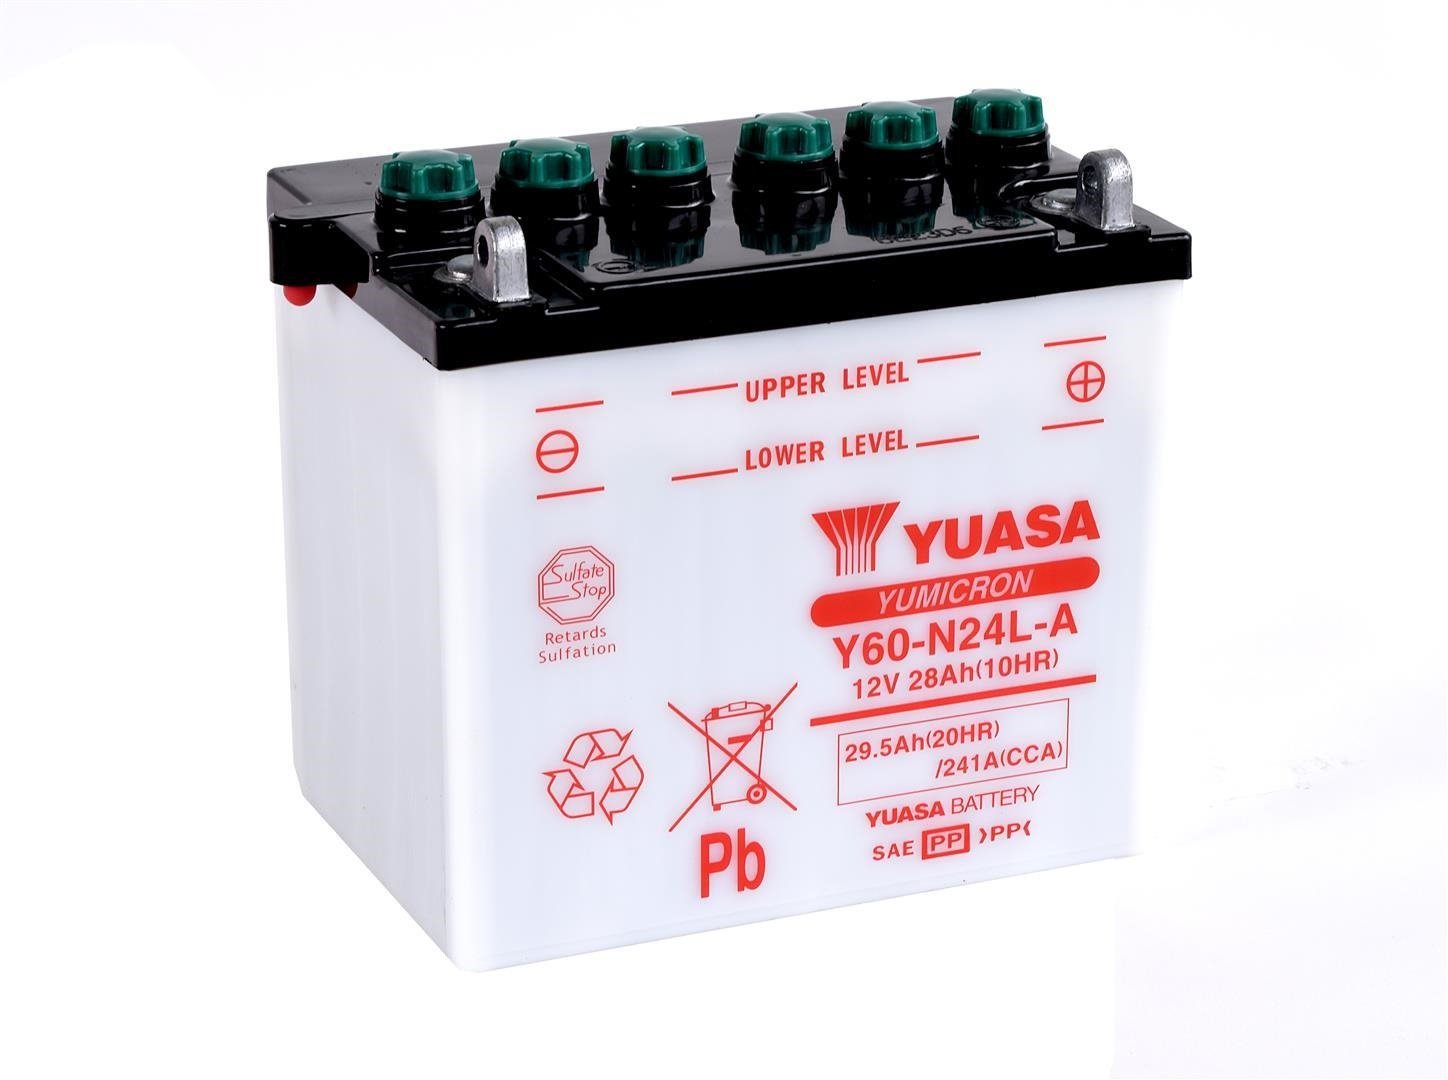 Yuasa Y60-N24L-A Conventional Motorcycle Battery Size